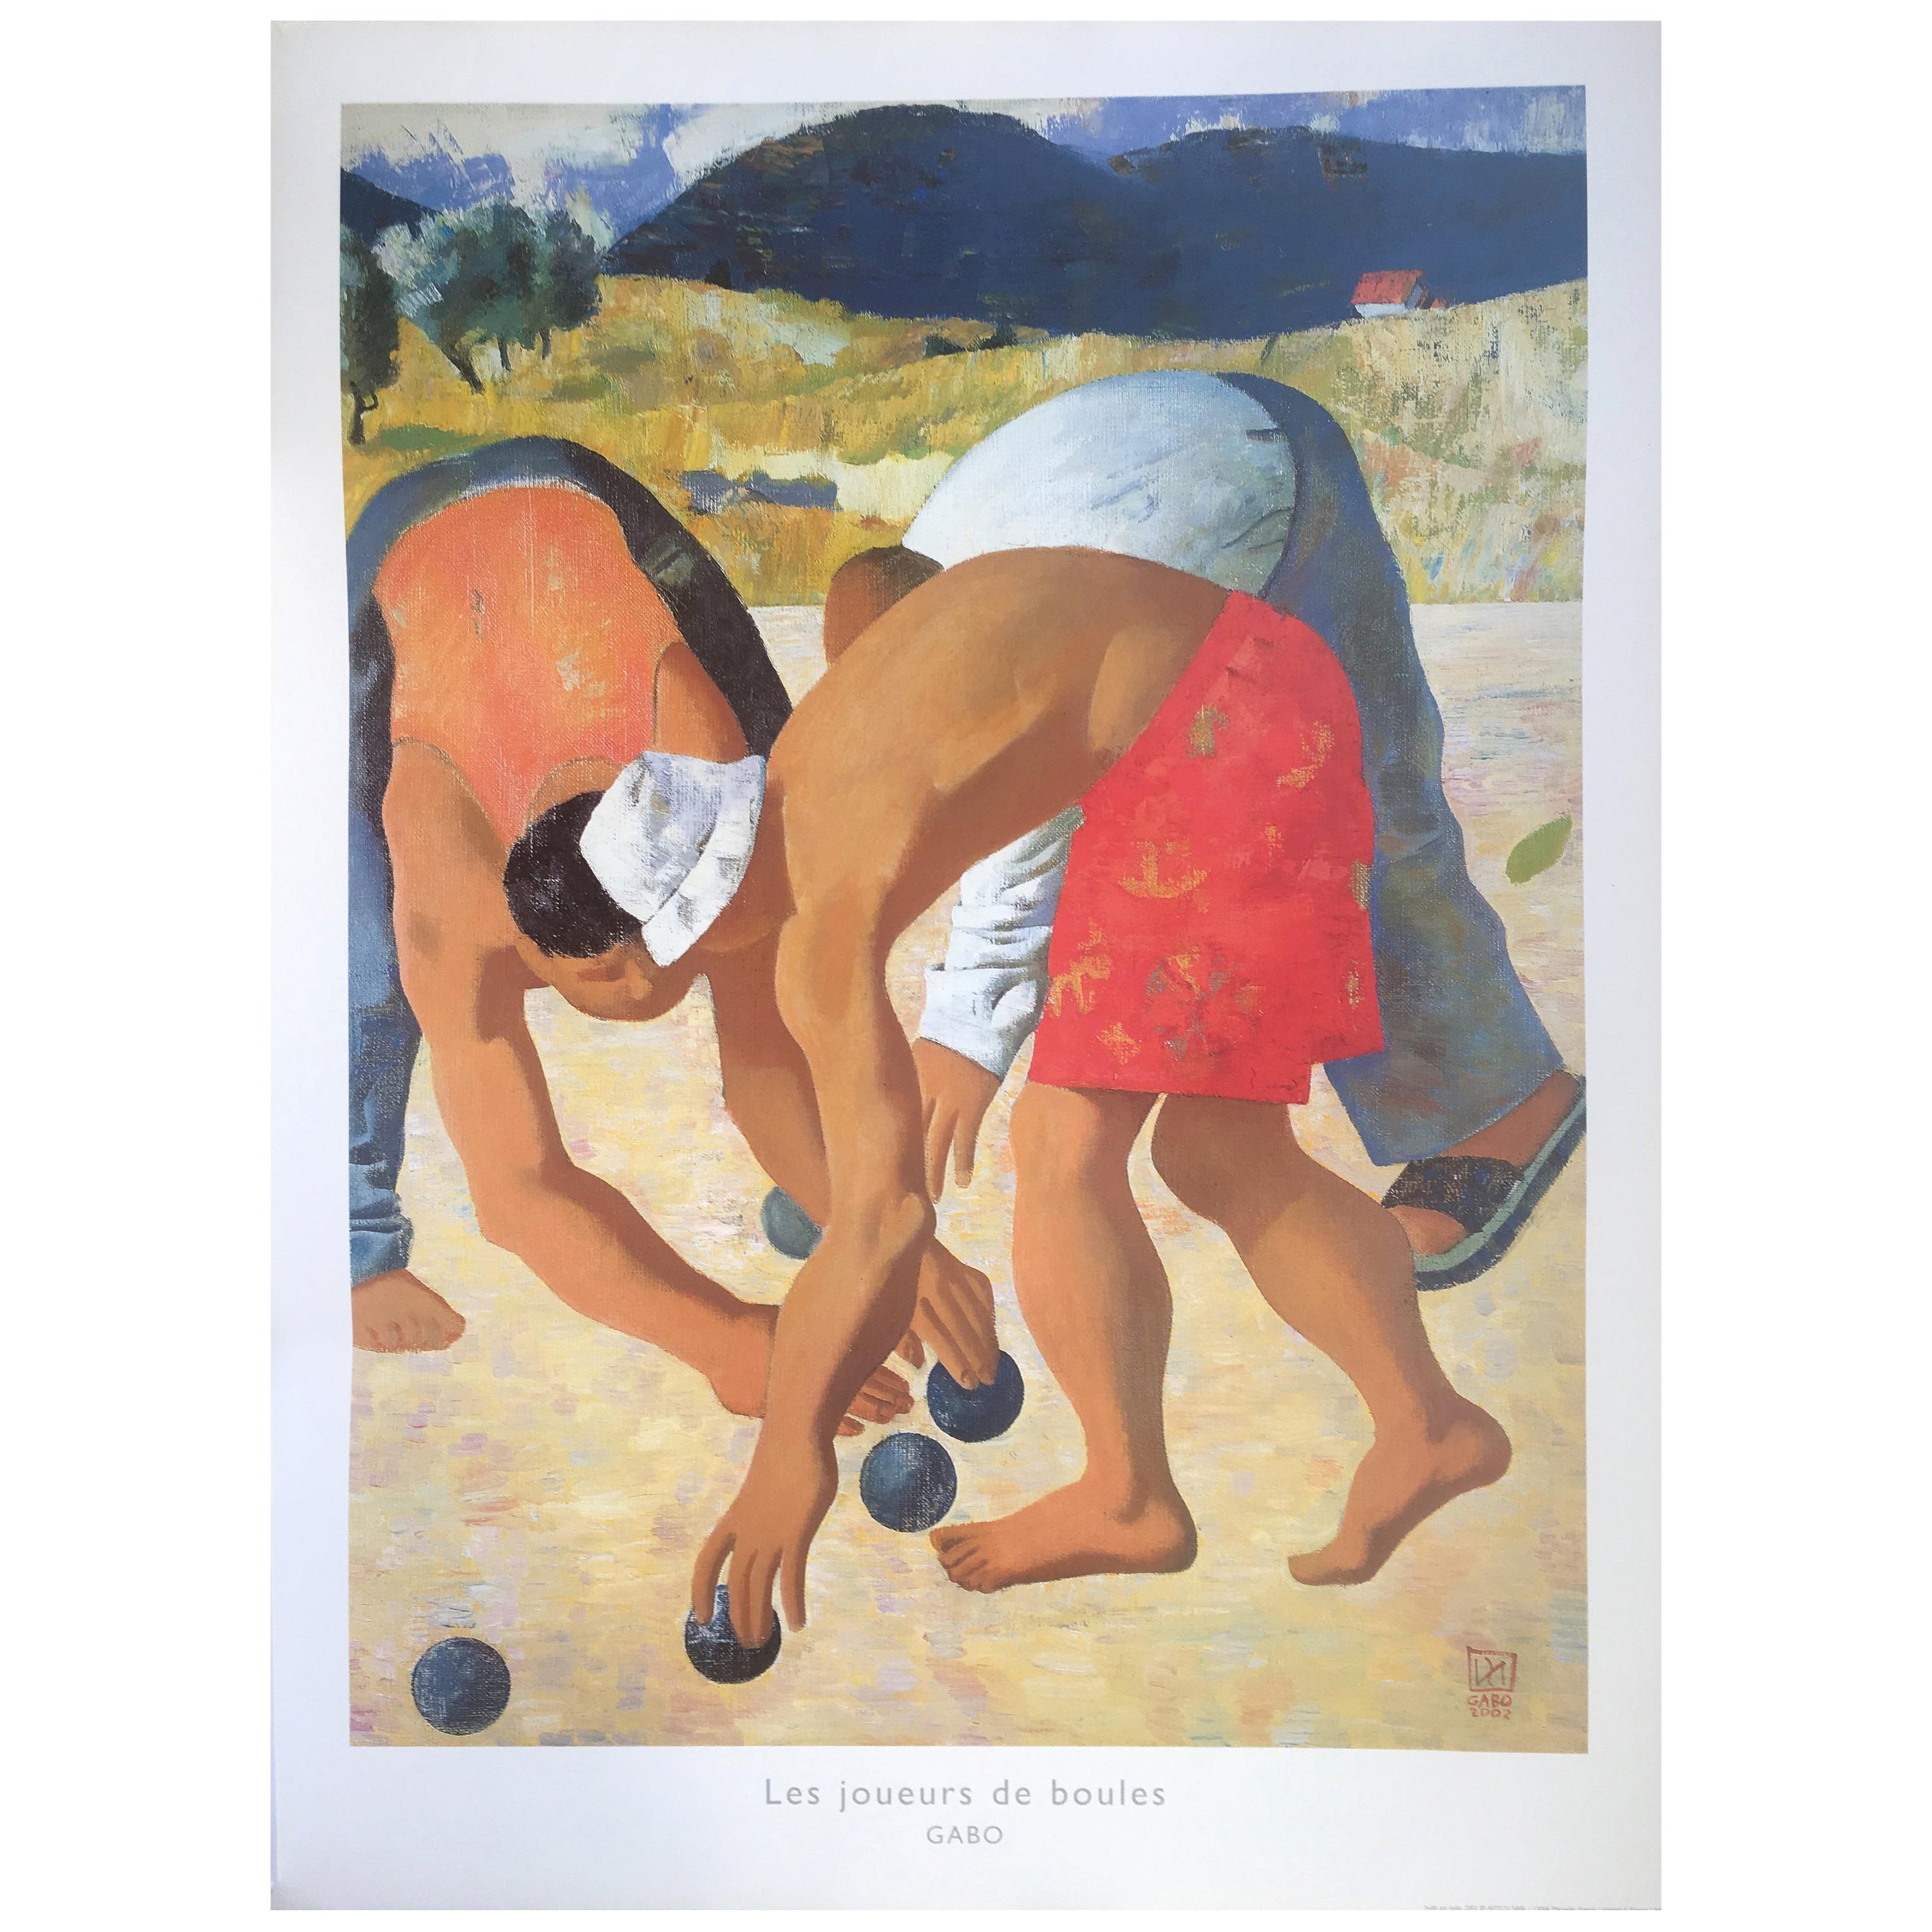 Original Poster by Gabo, Men Playing Petanque in Provence